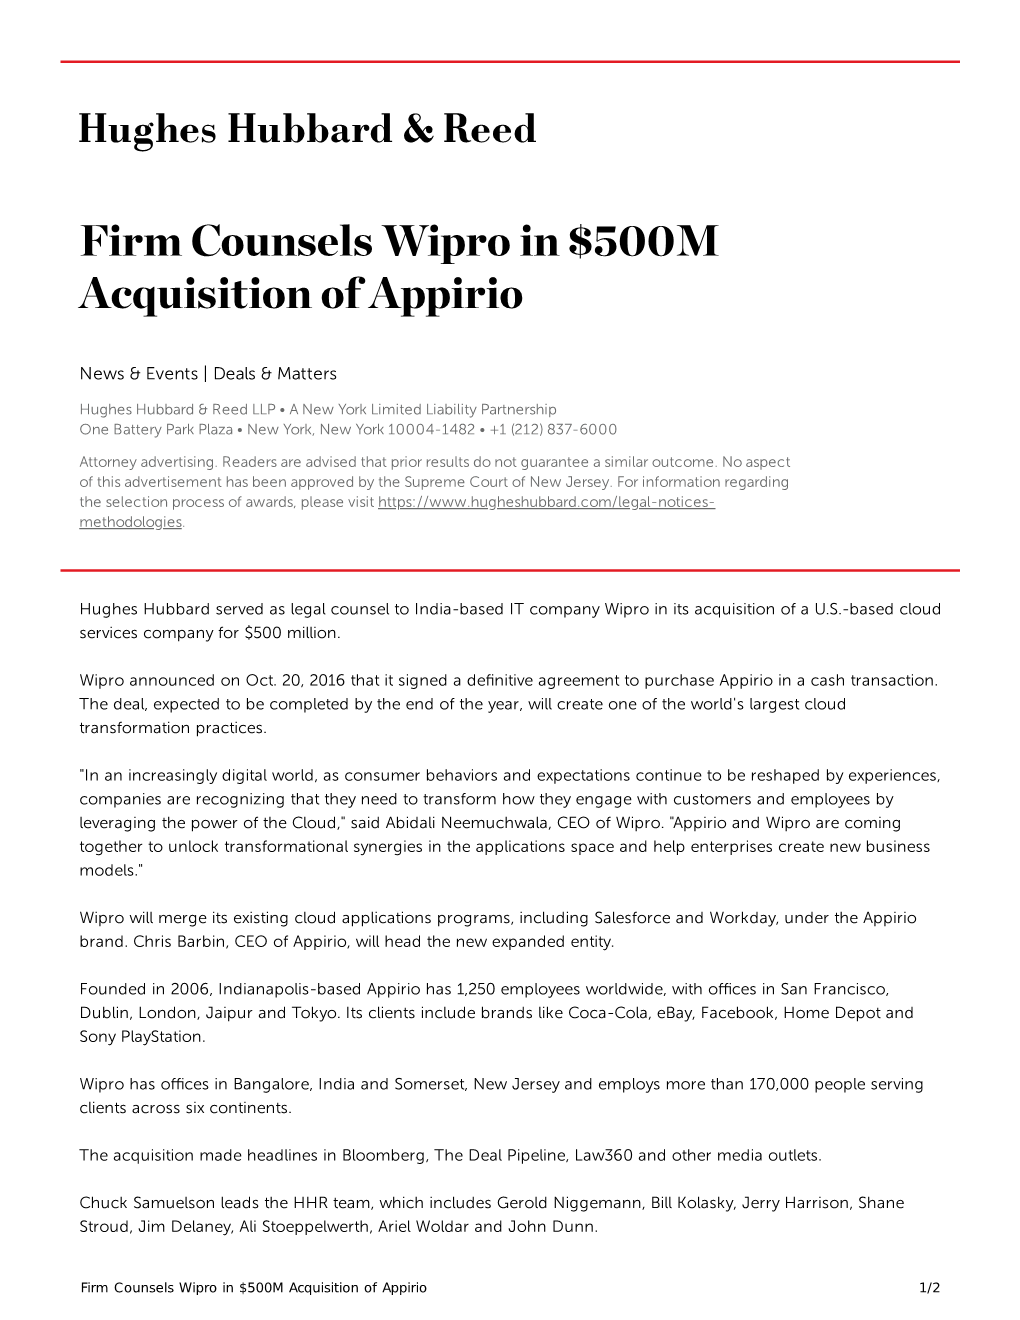 Firm Counsels Wipro in $500M Acquisition of Appirio